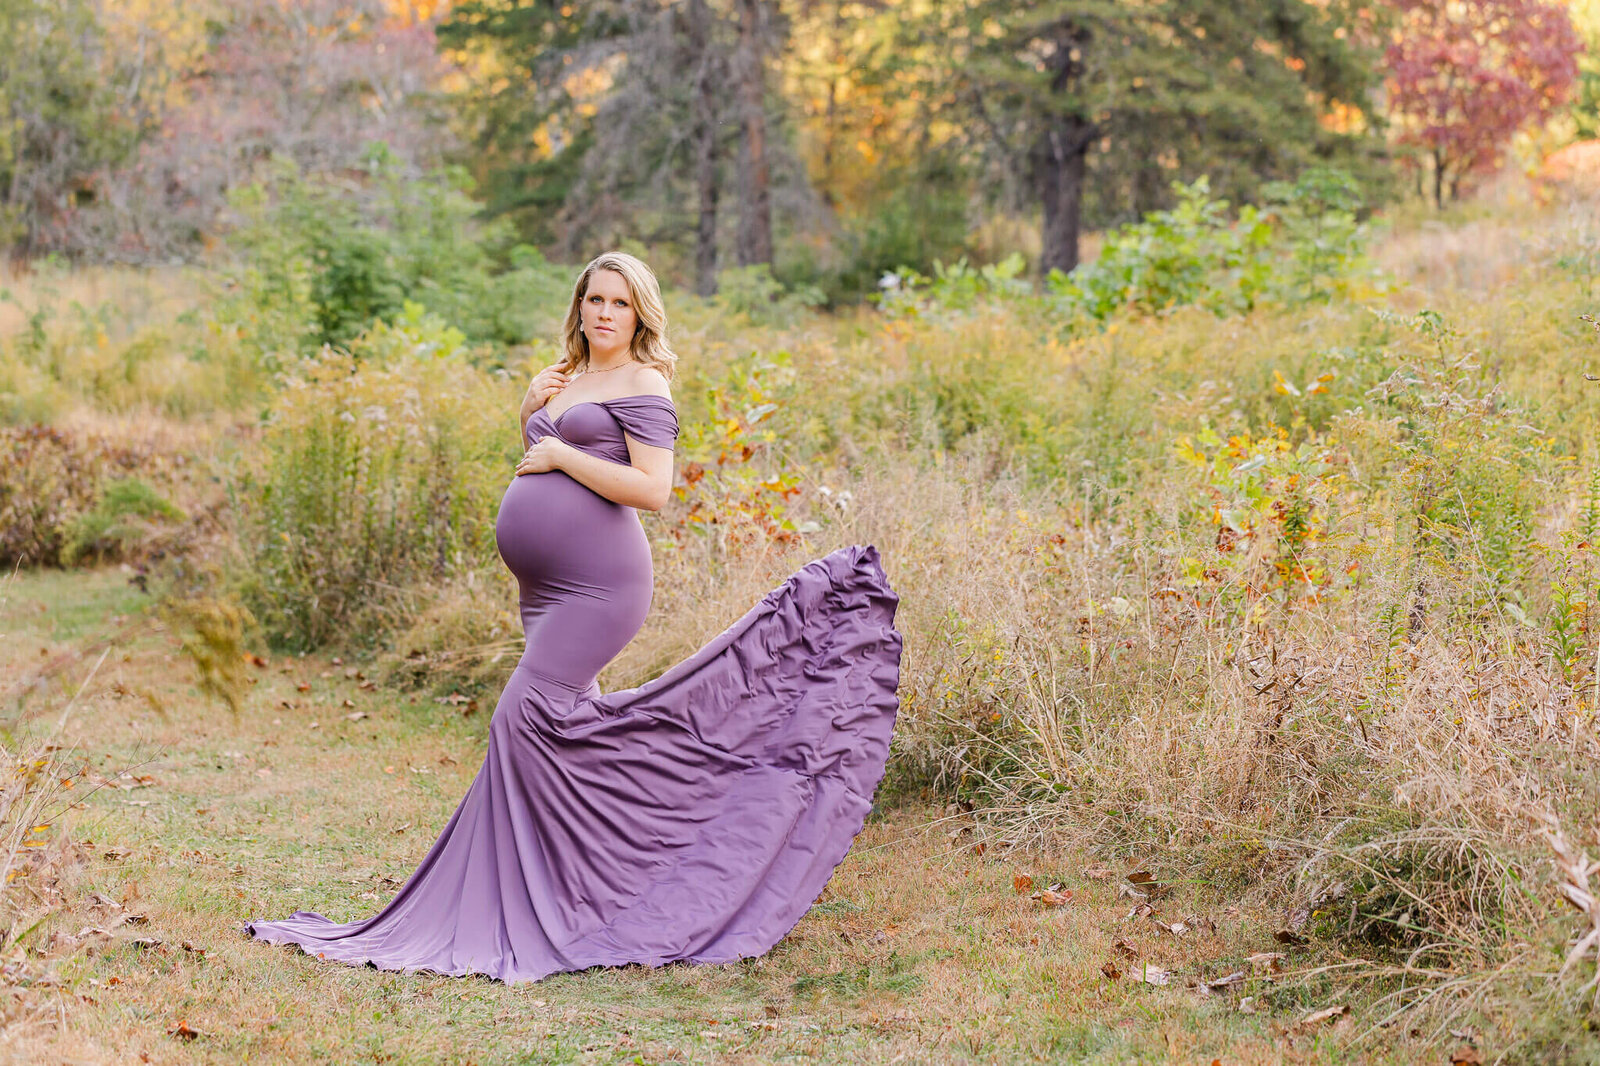 A pregnant woman in a field with her purple dress flying behind her